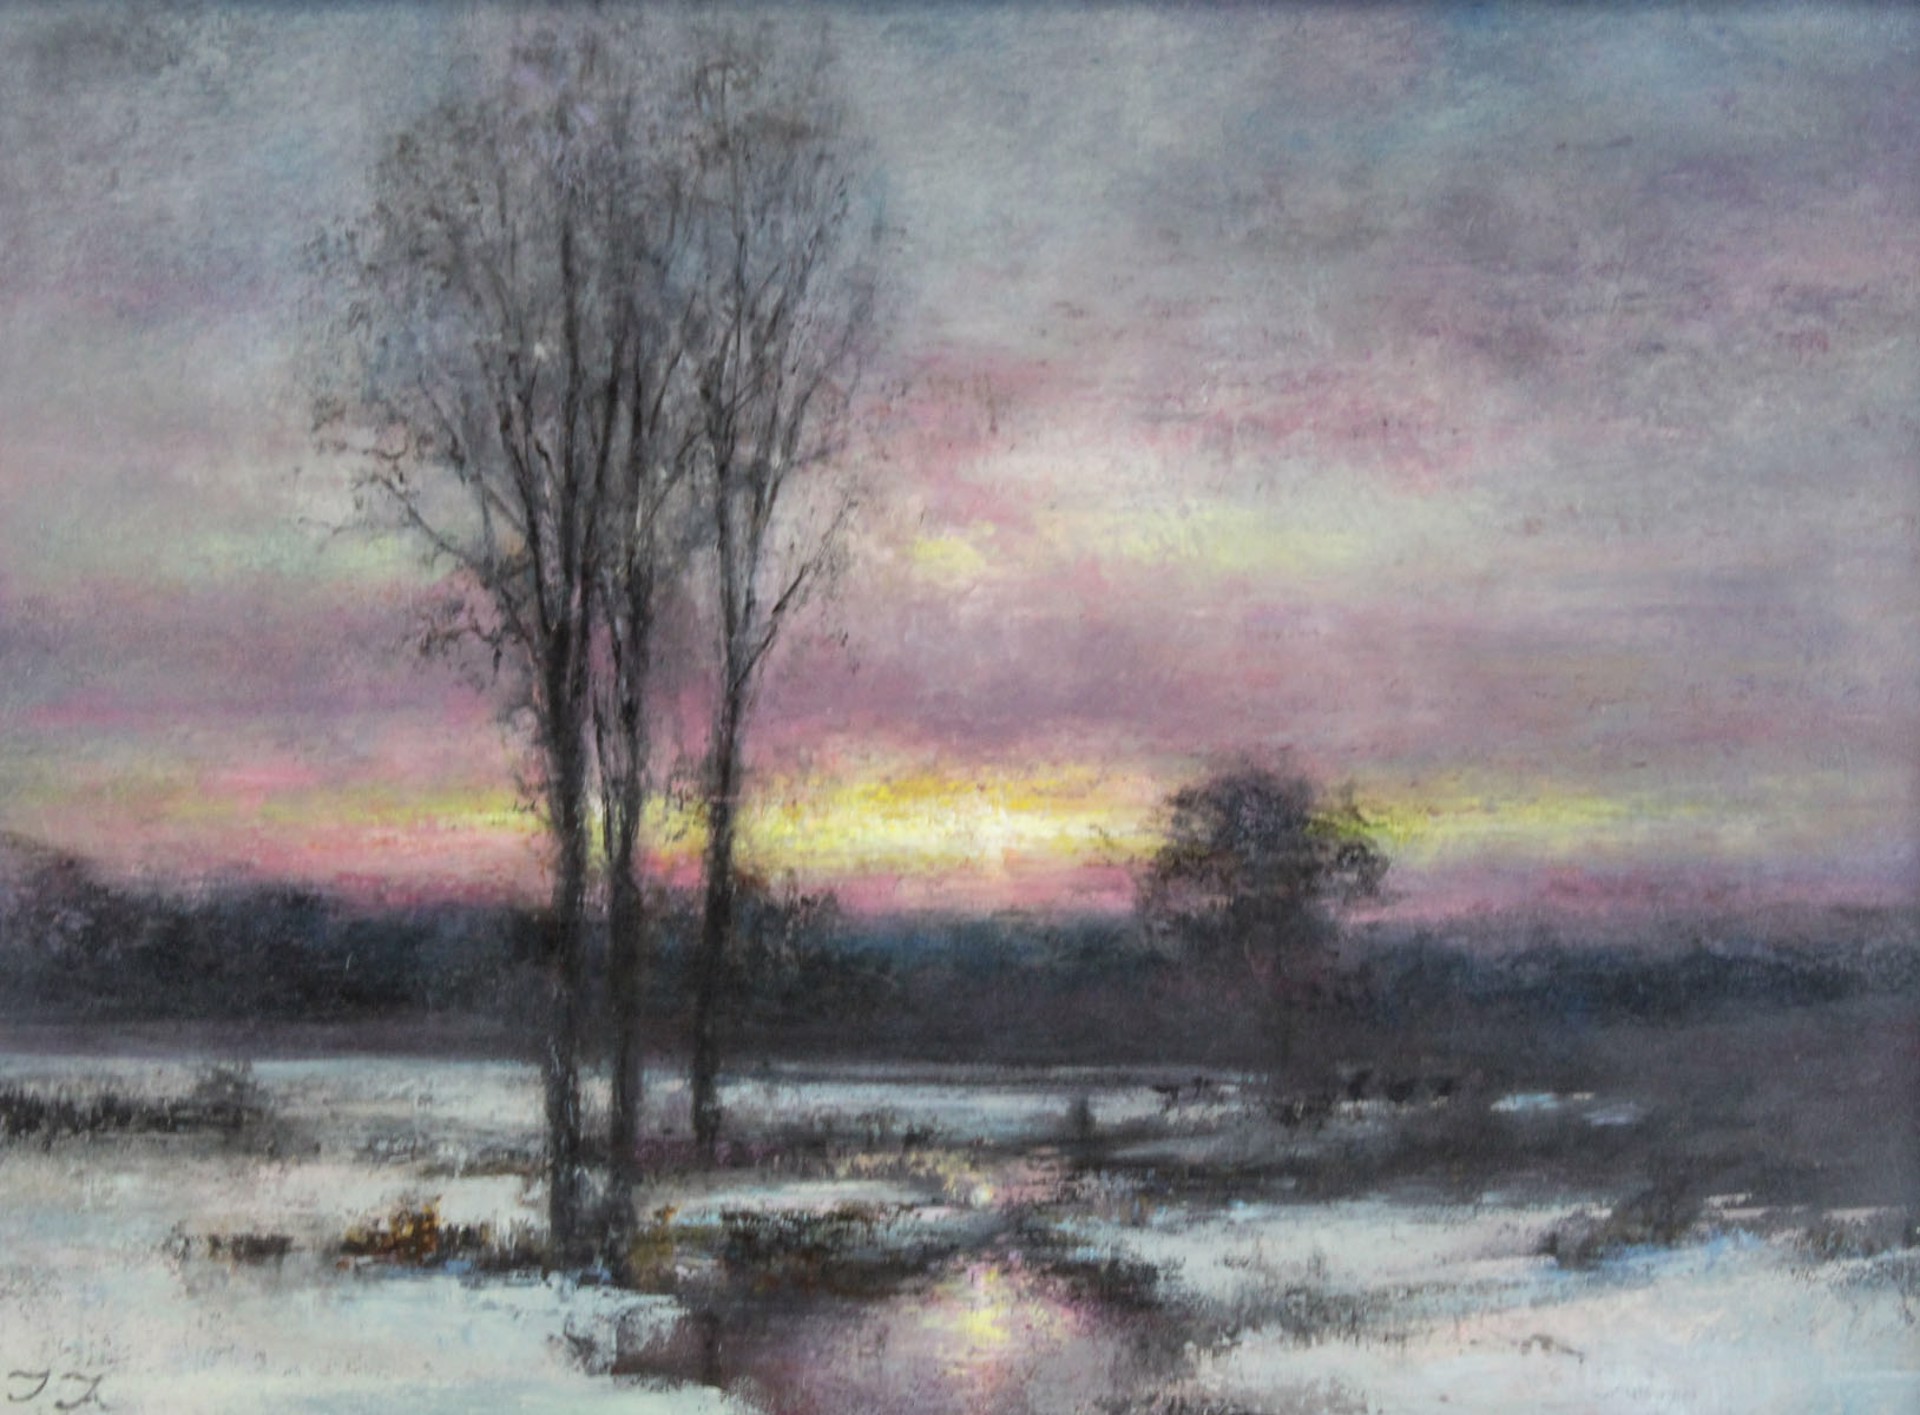 Winter, Close of Day by John Andersen